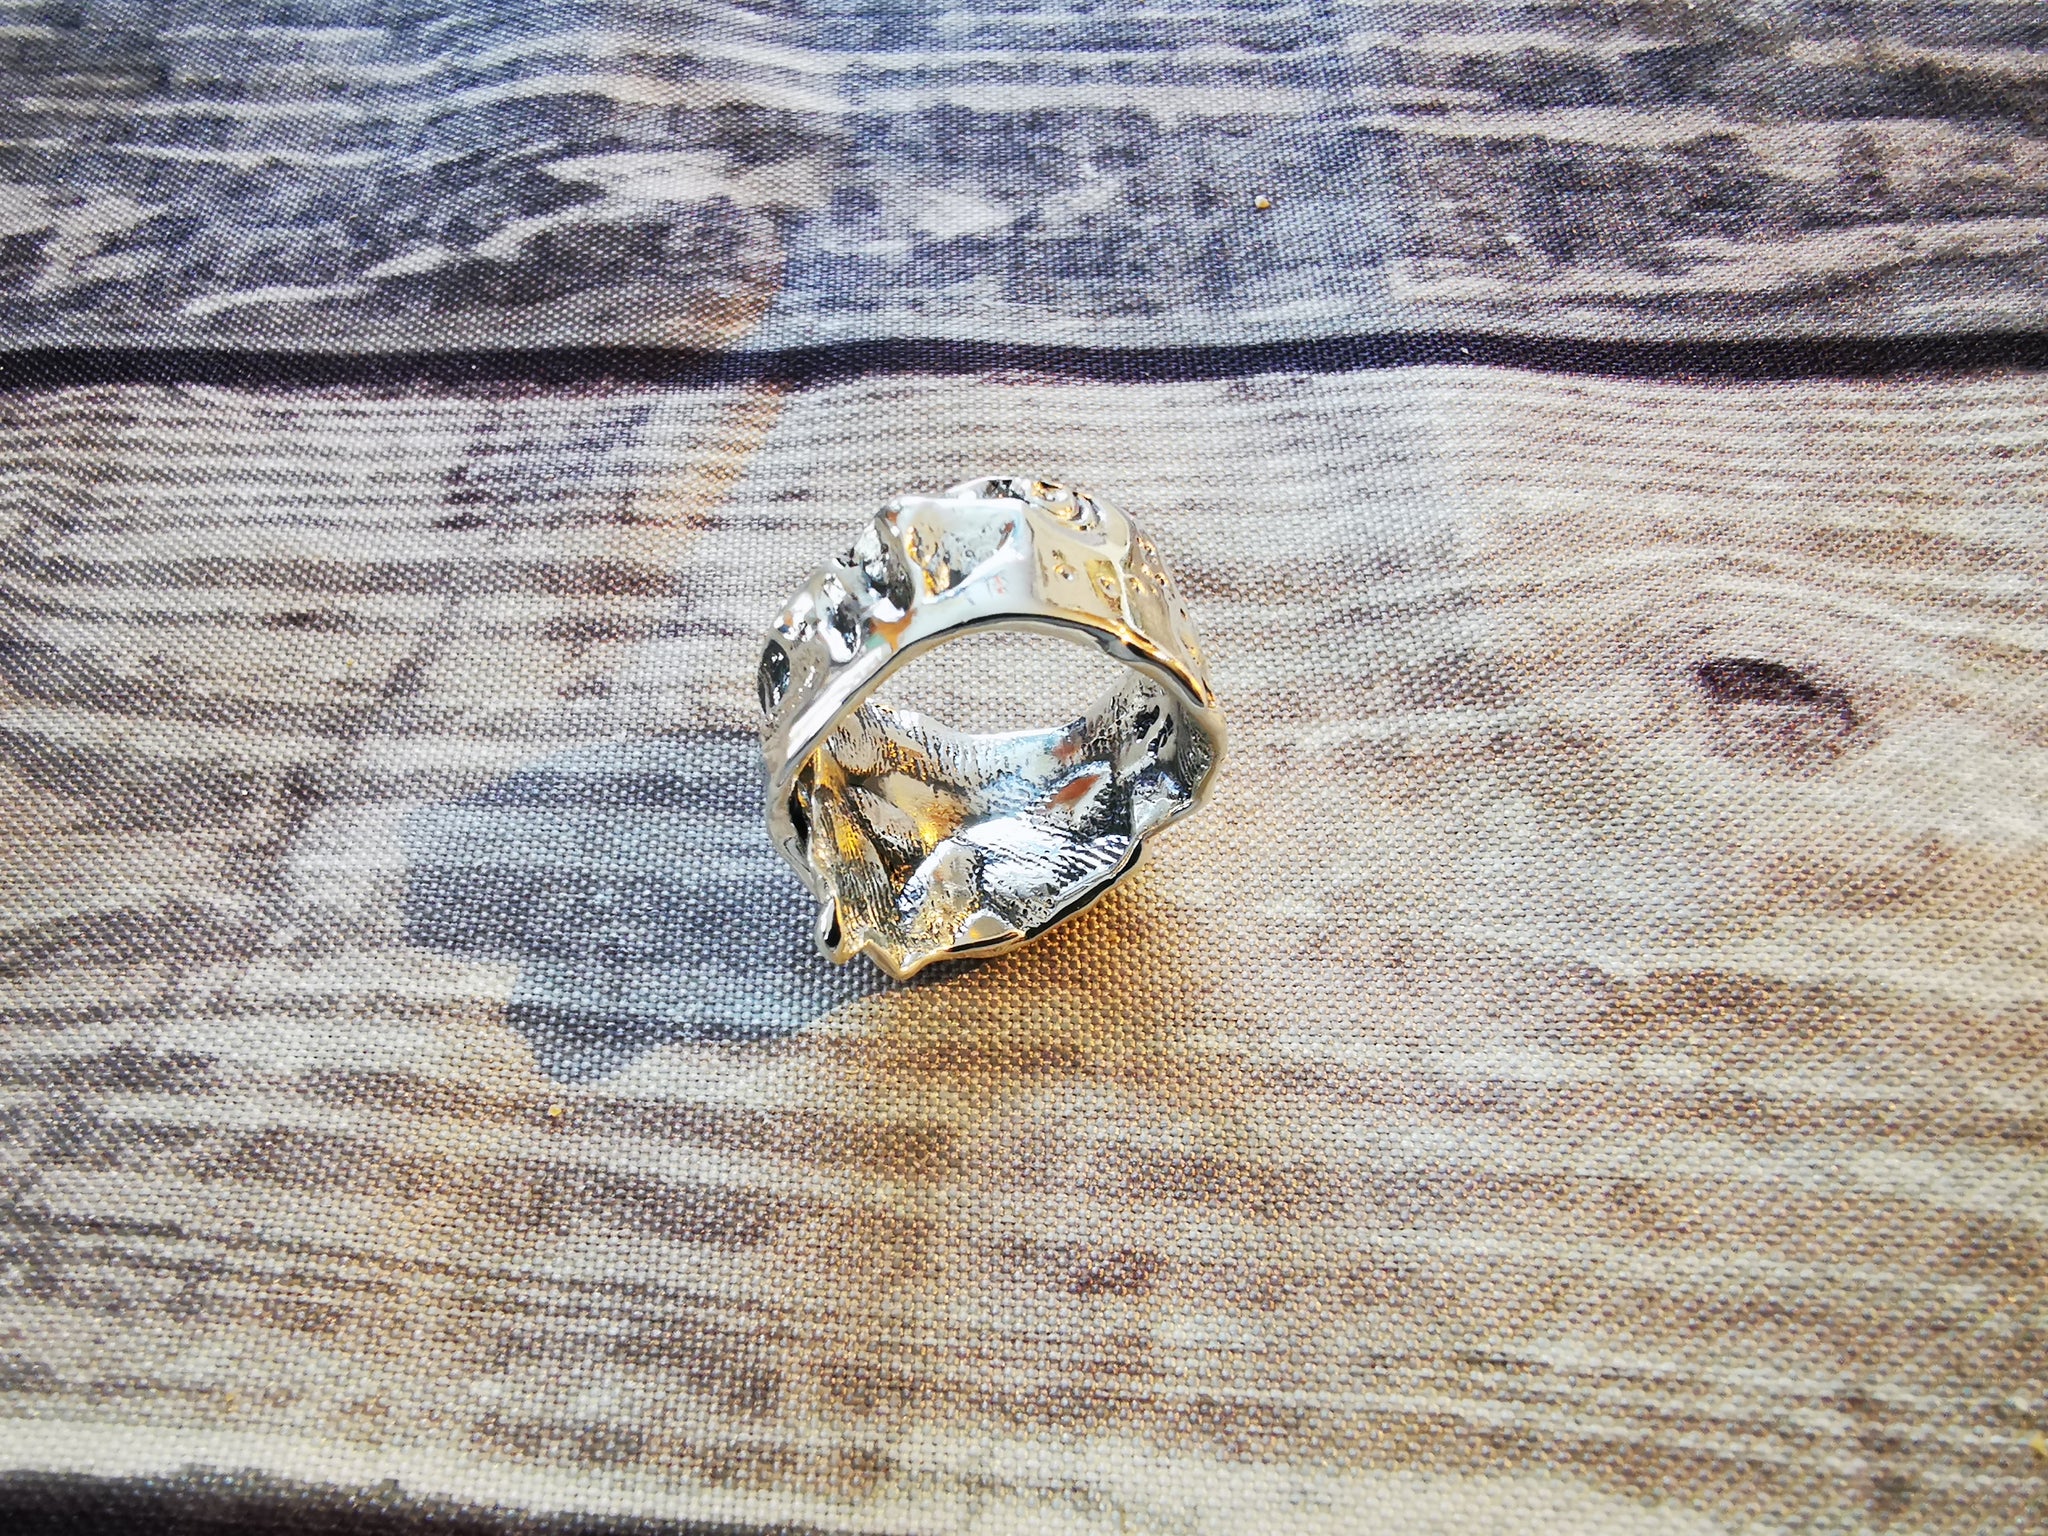 SEA SUN, unique ring with a texture of grains: rice, sunflower and sea urchin shell